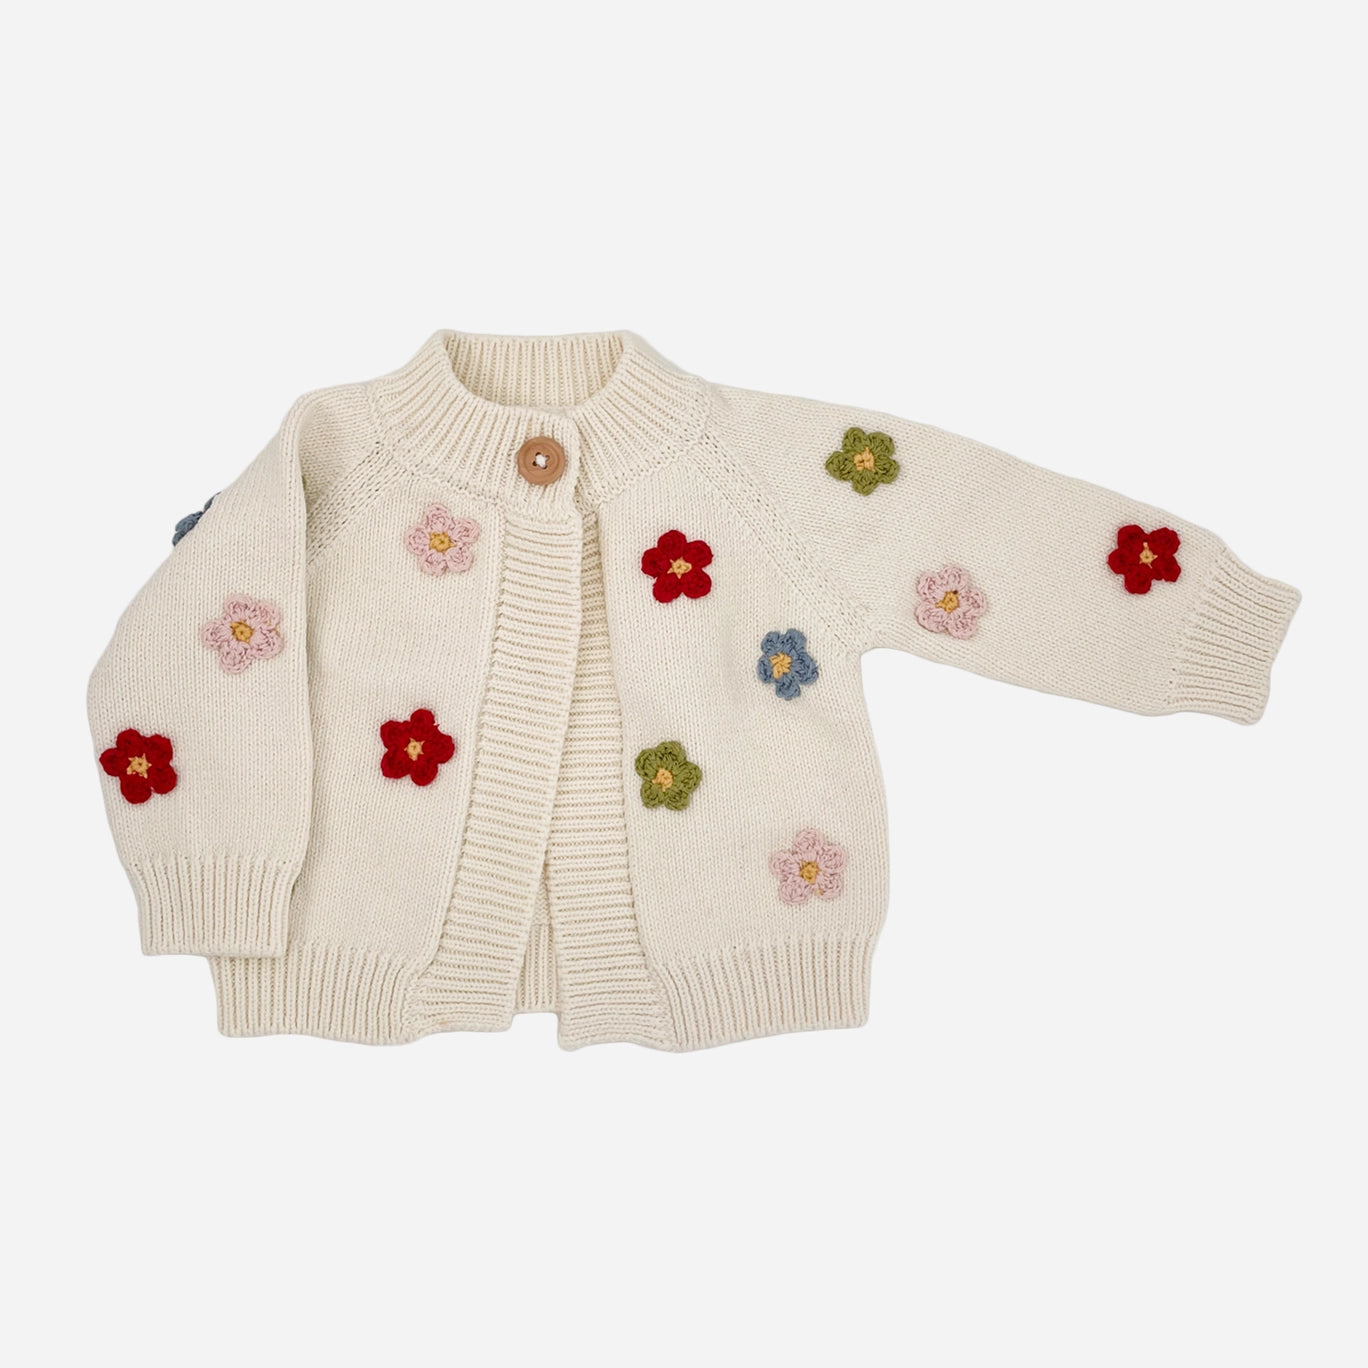 The Blueberry Hill infant girl cotton flower cardigan